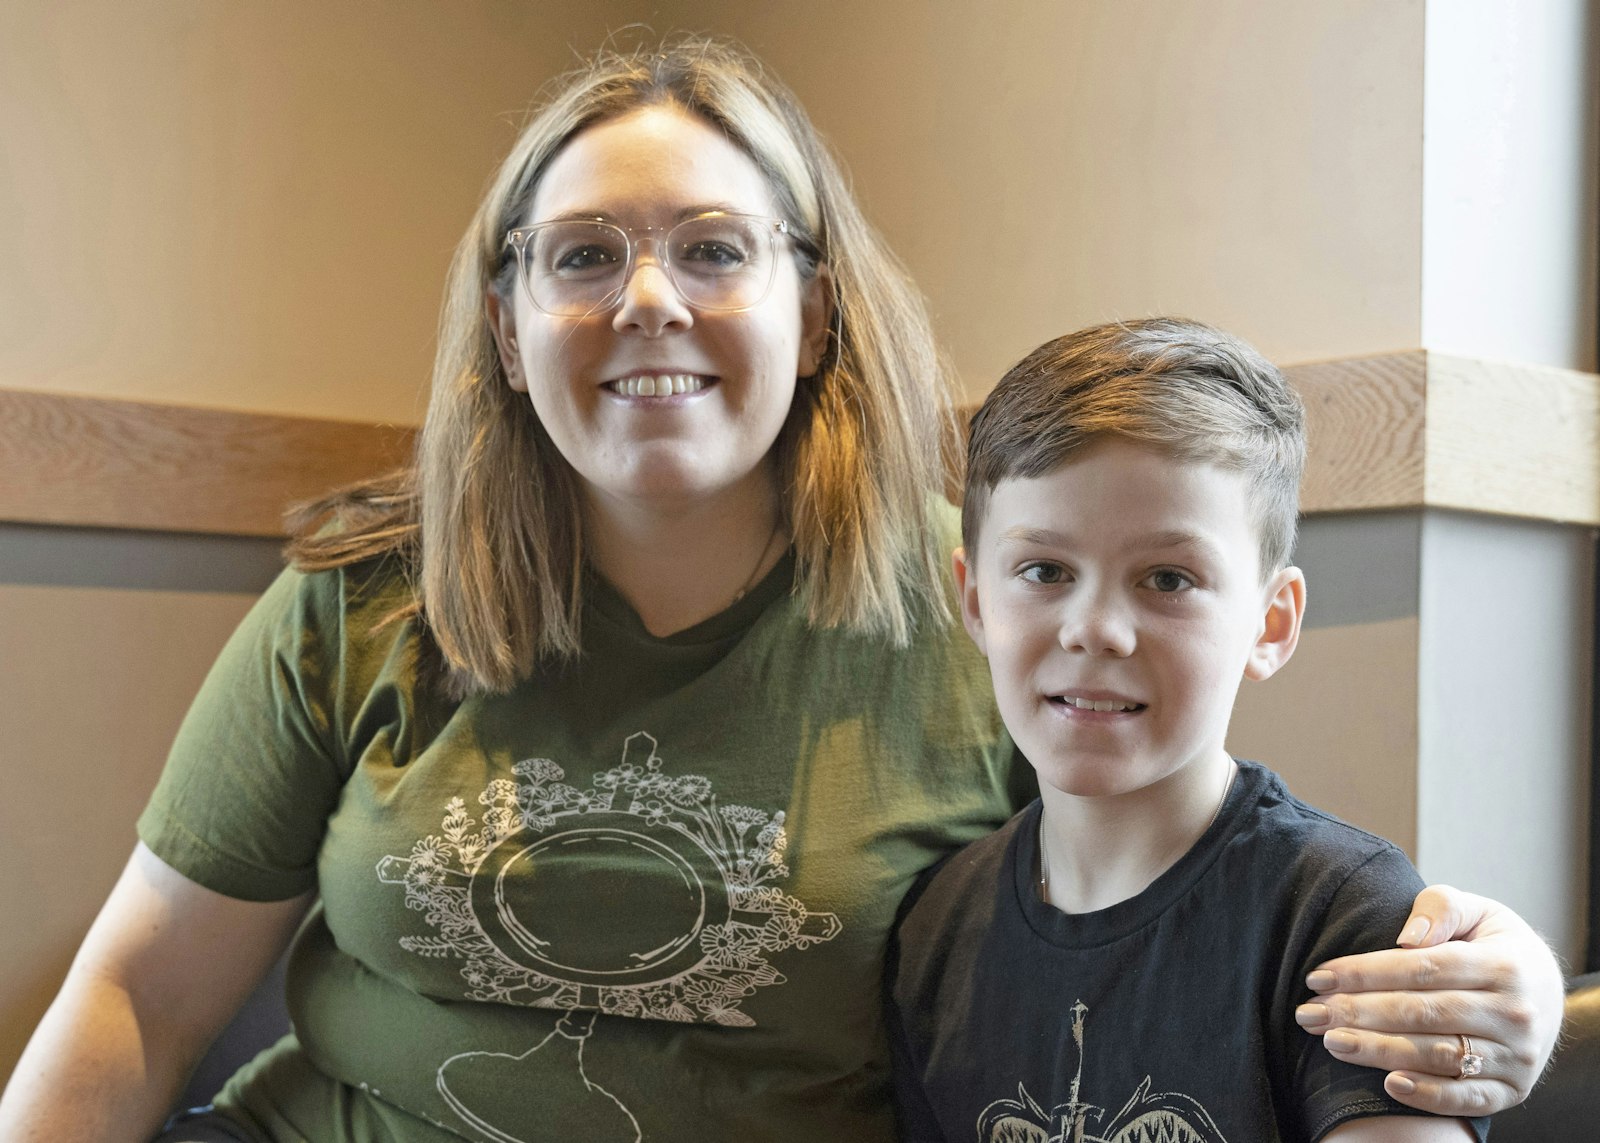 Steffi Howell, Teddy's mother, said her son chose to start his own podcast to inspire other children to pray and read the Bible. When he grows up, Teddy said he wants to be a podcasting priest like Fr. Mike Schmitz. (Gabriella Patti | Detroit Catholic)